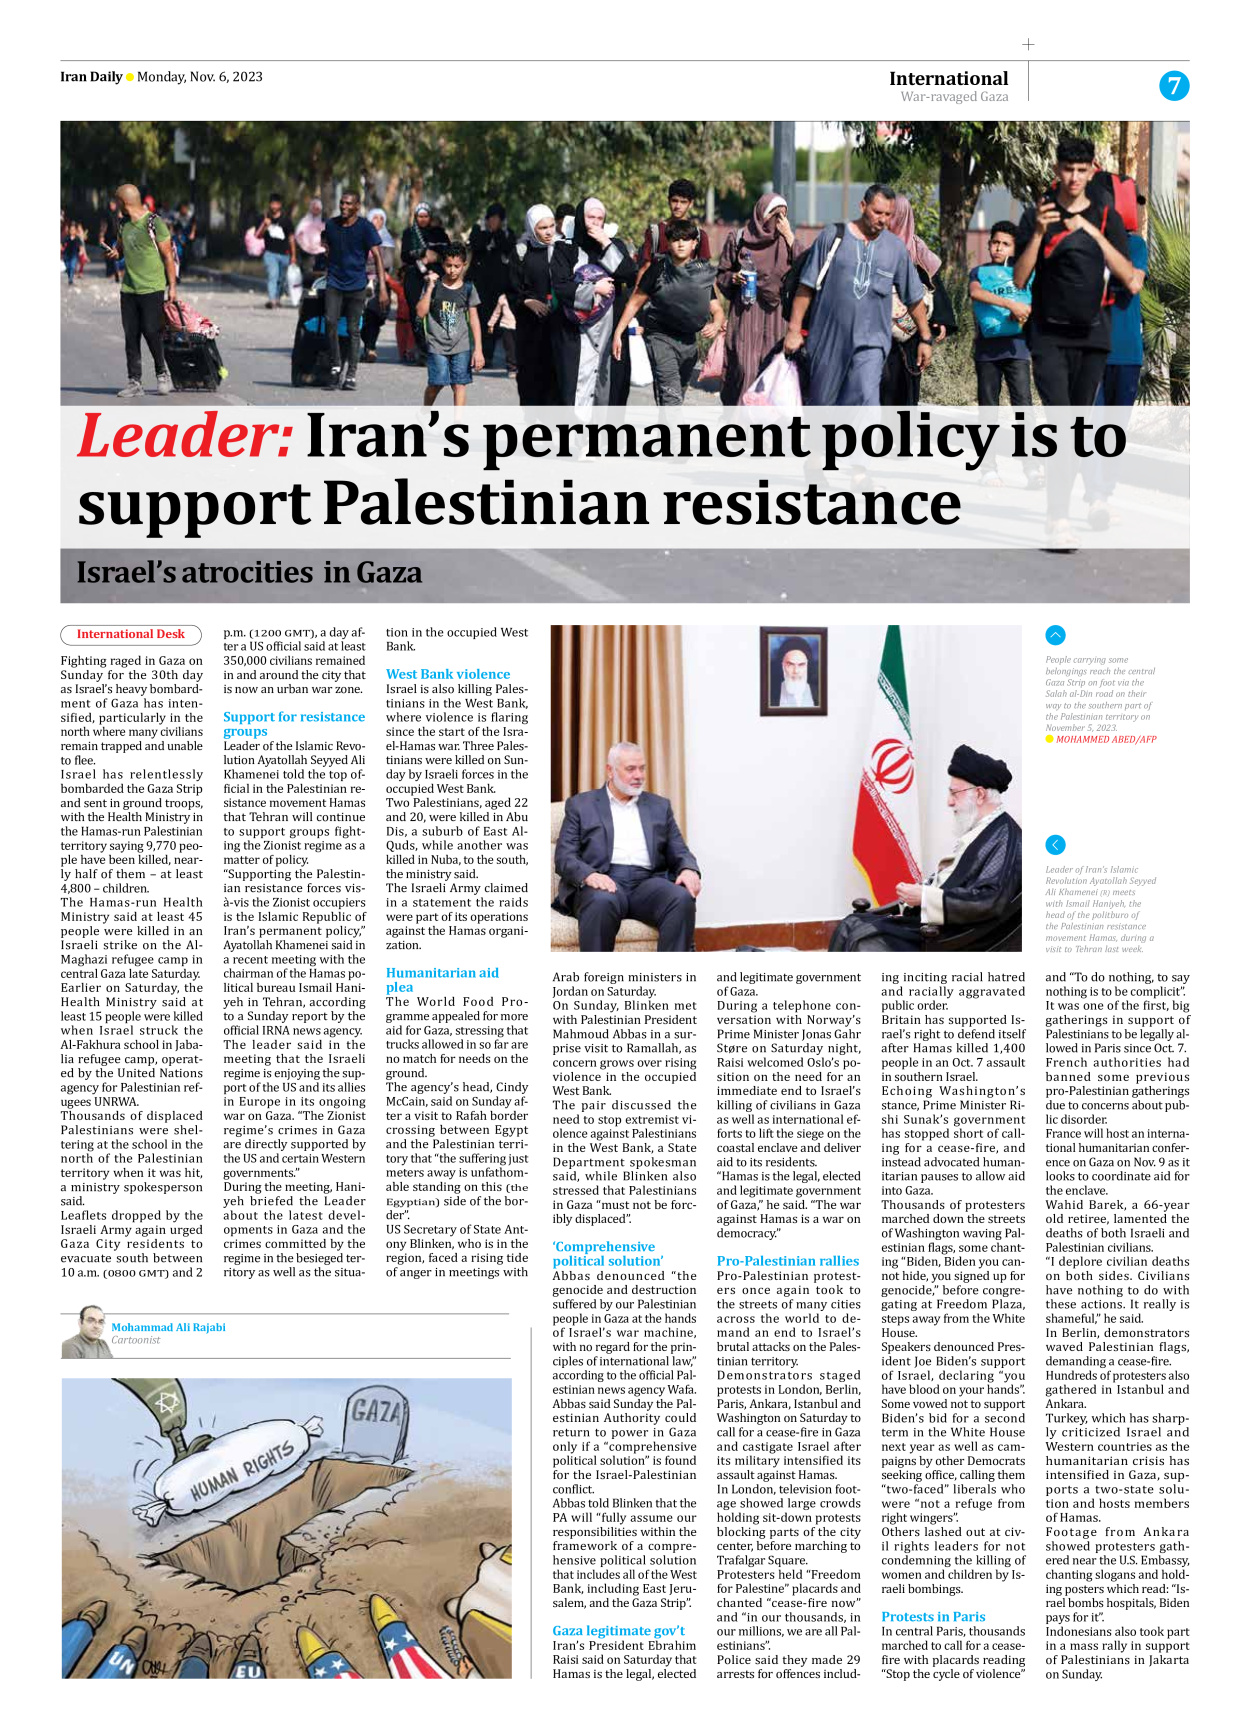 Iran Daily - Number Seven Thousand Four Hundred and Twenty Seven - 06 November 2023 - Page 7